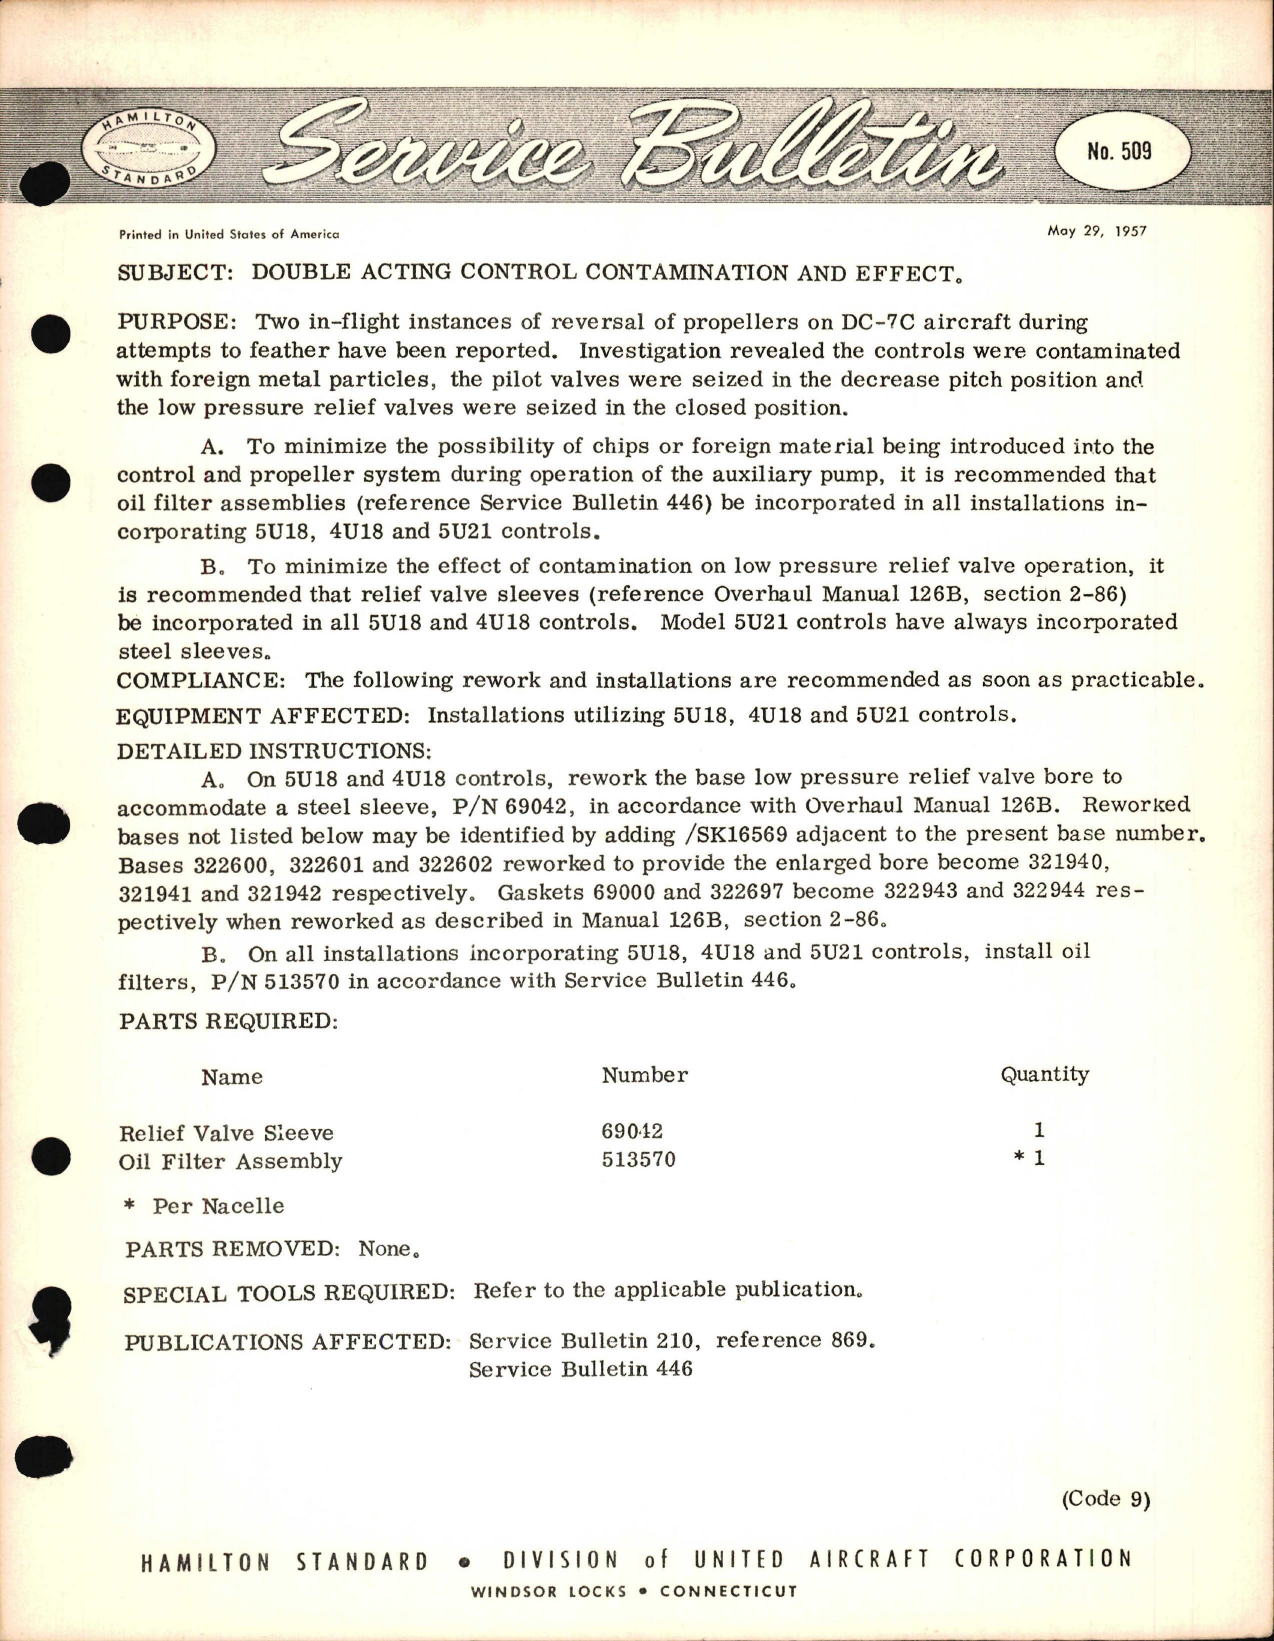 Sample page 1 from AirCorps Library document: Double Acting Control Contamination and Effect